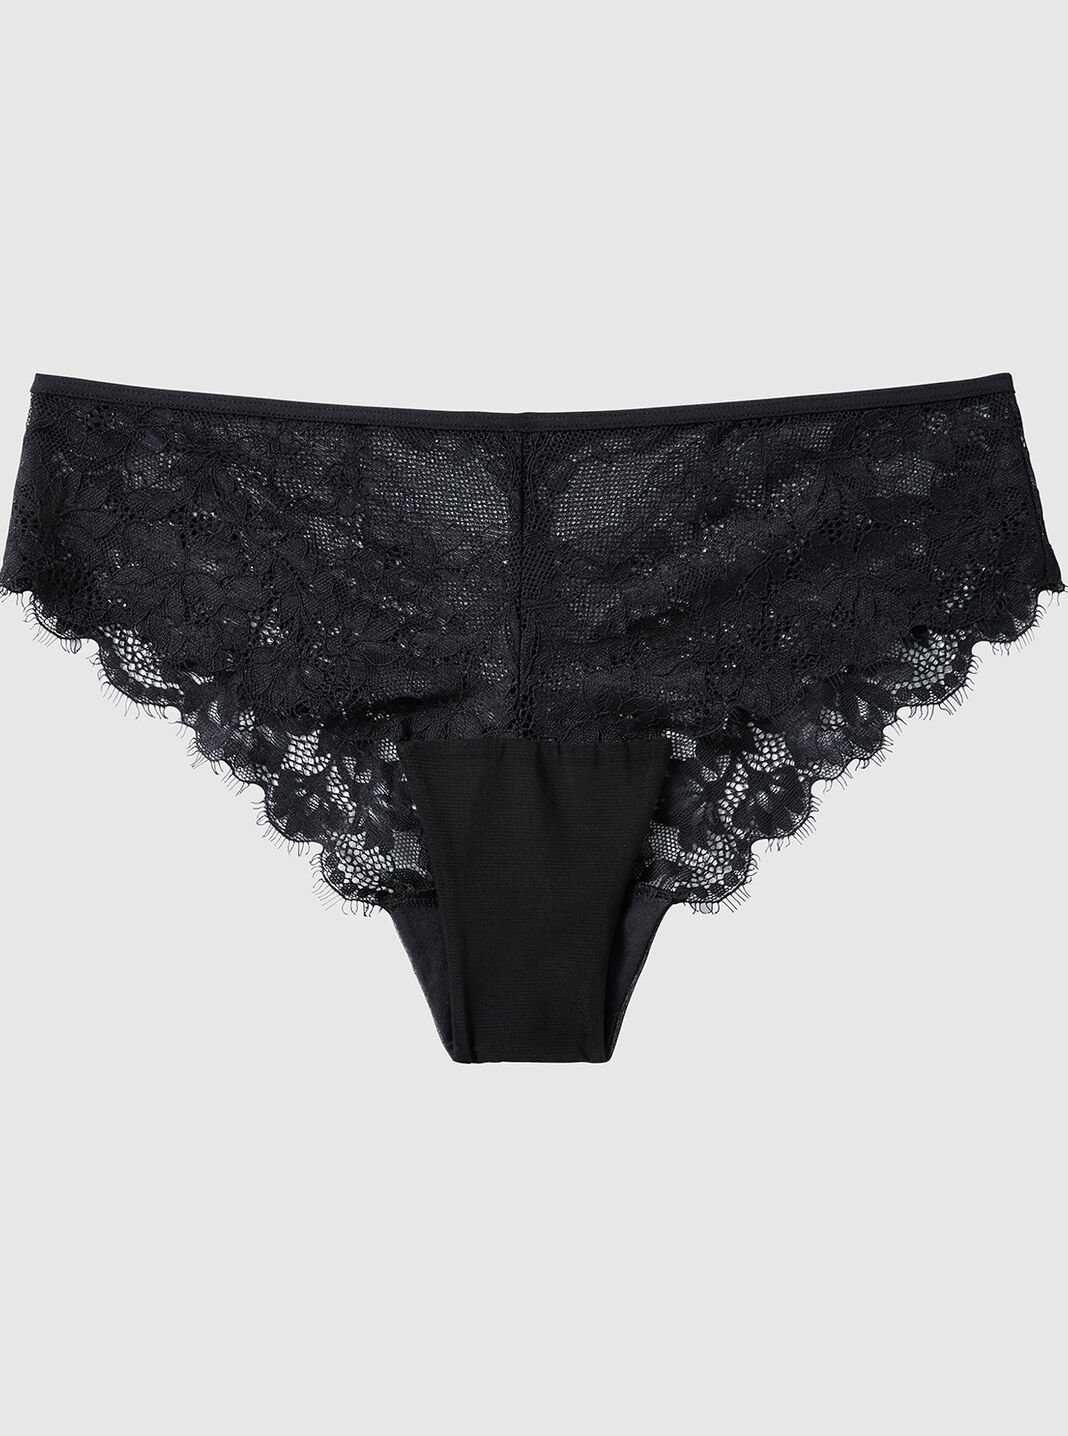 Wholesale black lace thongs In Sexy And Comfortable Styles